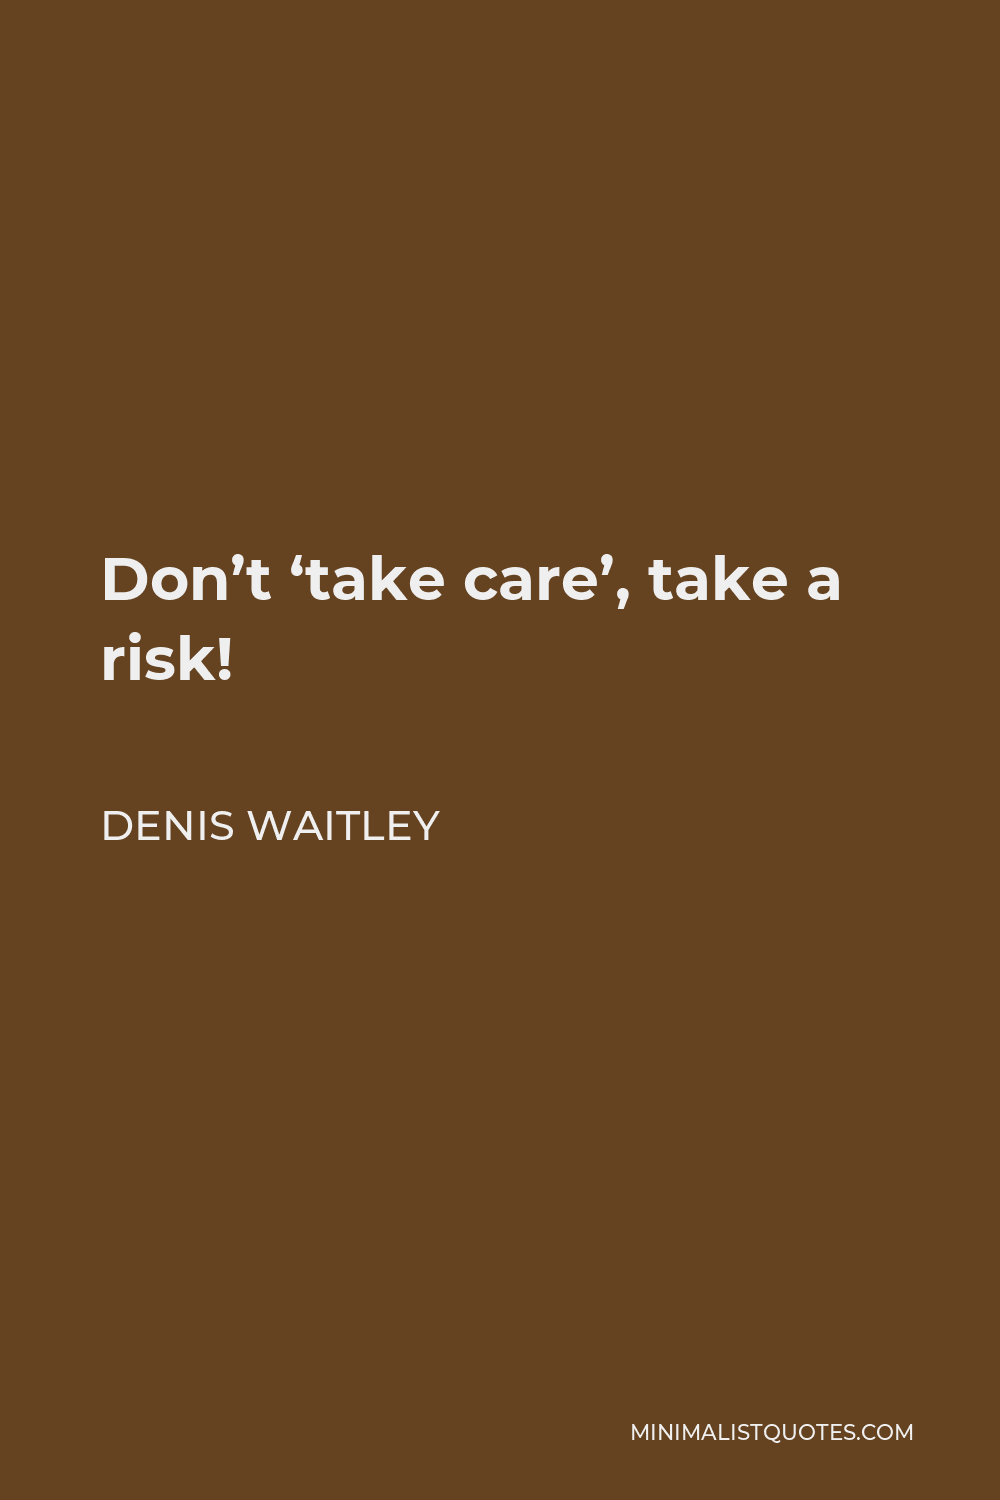 Denis Waitley Quote - Don’t ‘take care’, take a risk!